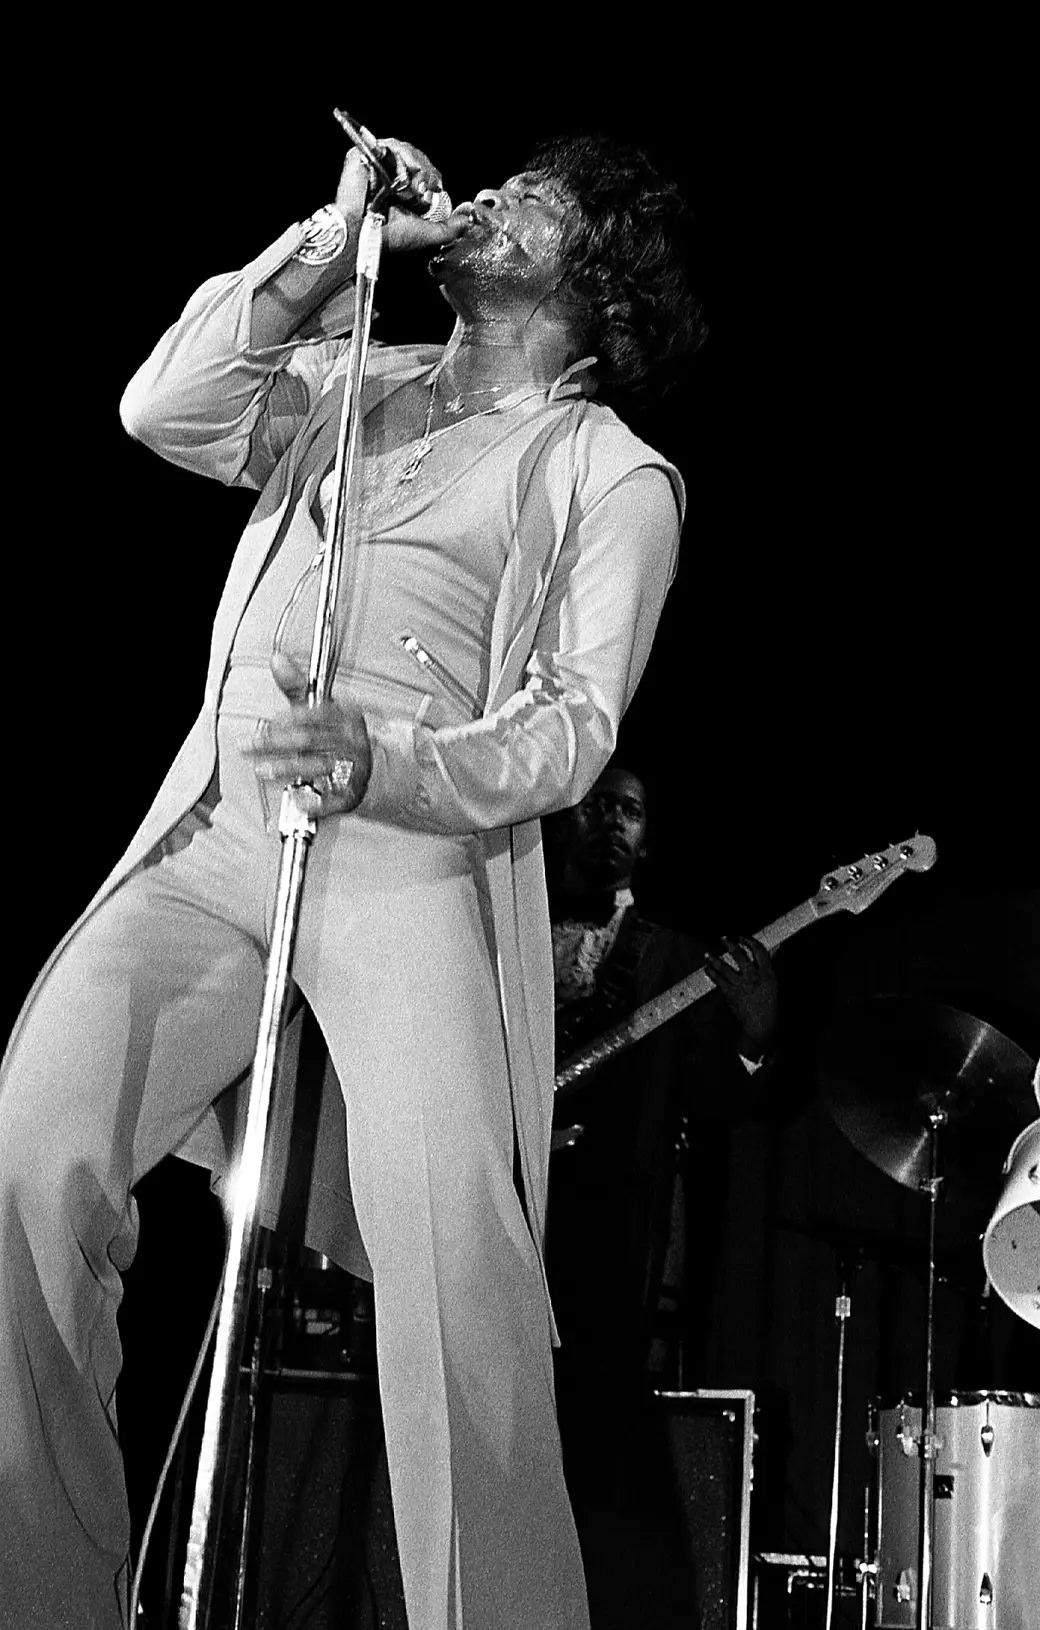 James Brown performs at the Bismarck Theatre in Chicago in January 1985.